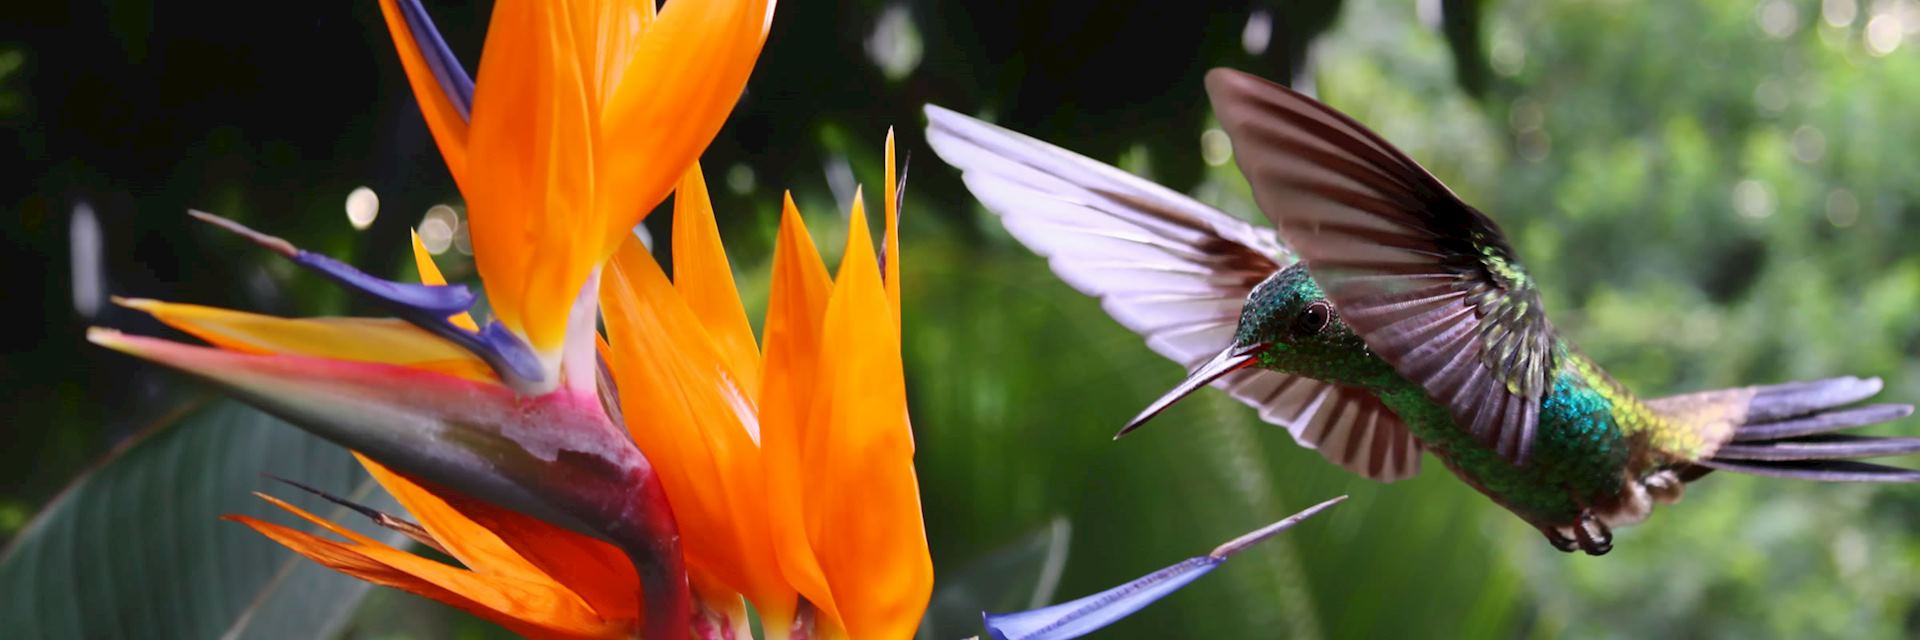 Hummingbirds are a familiar sight in Costa Rica’s cloudforests